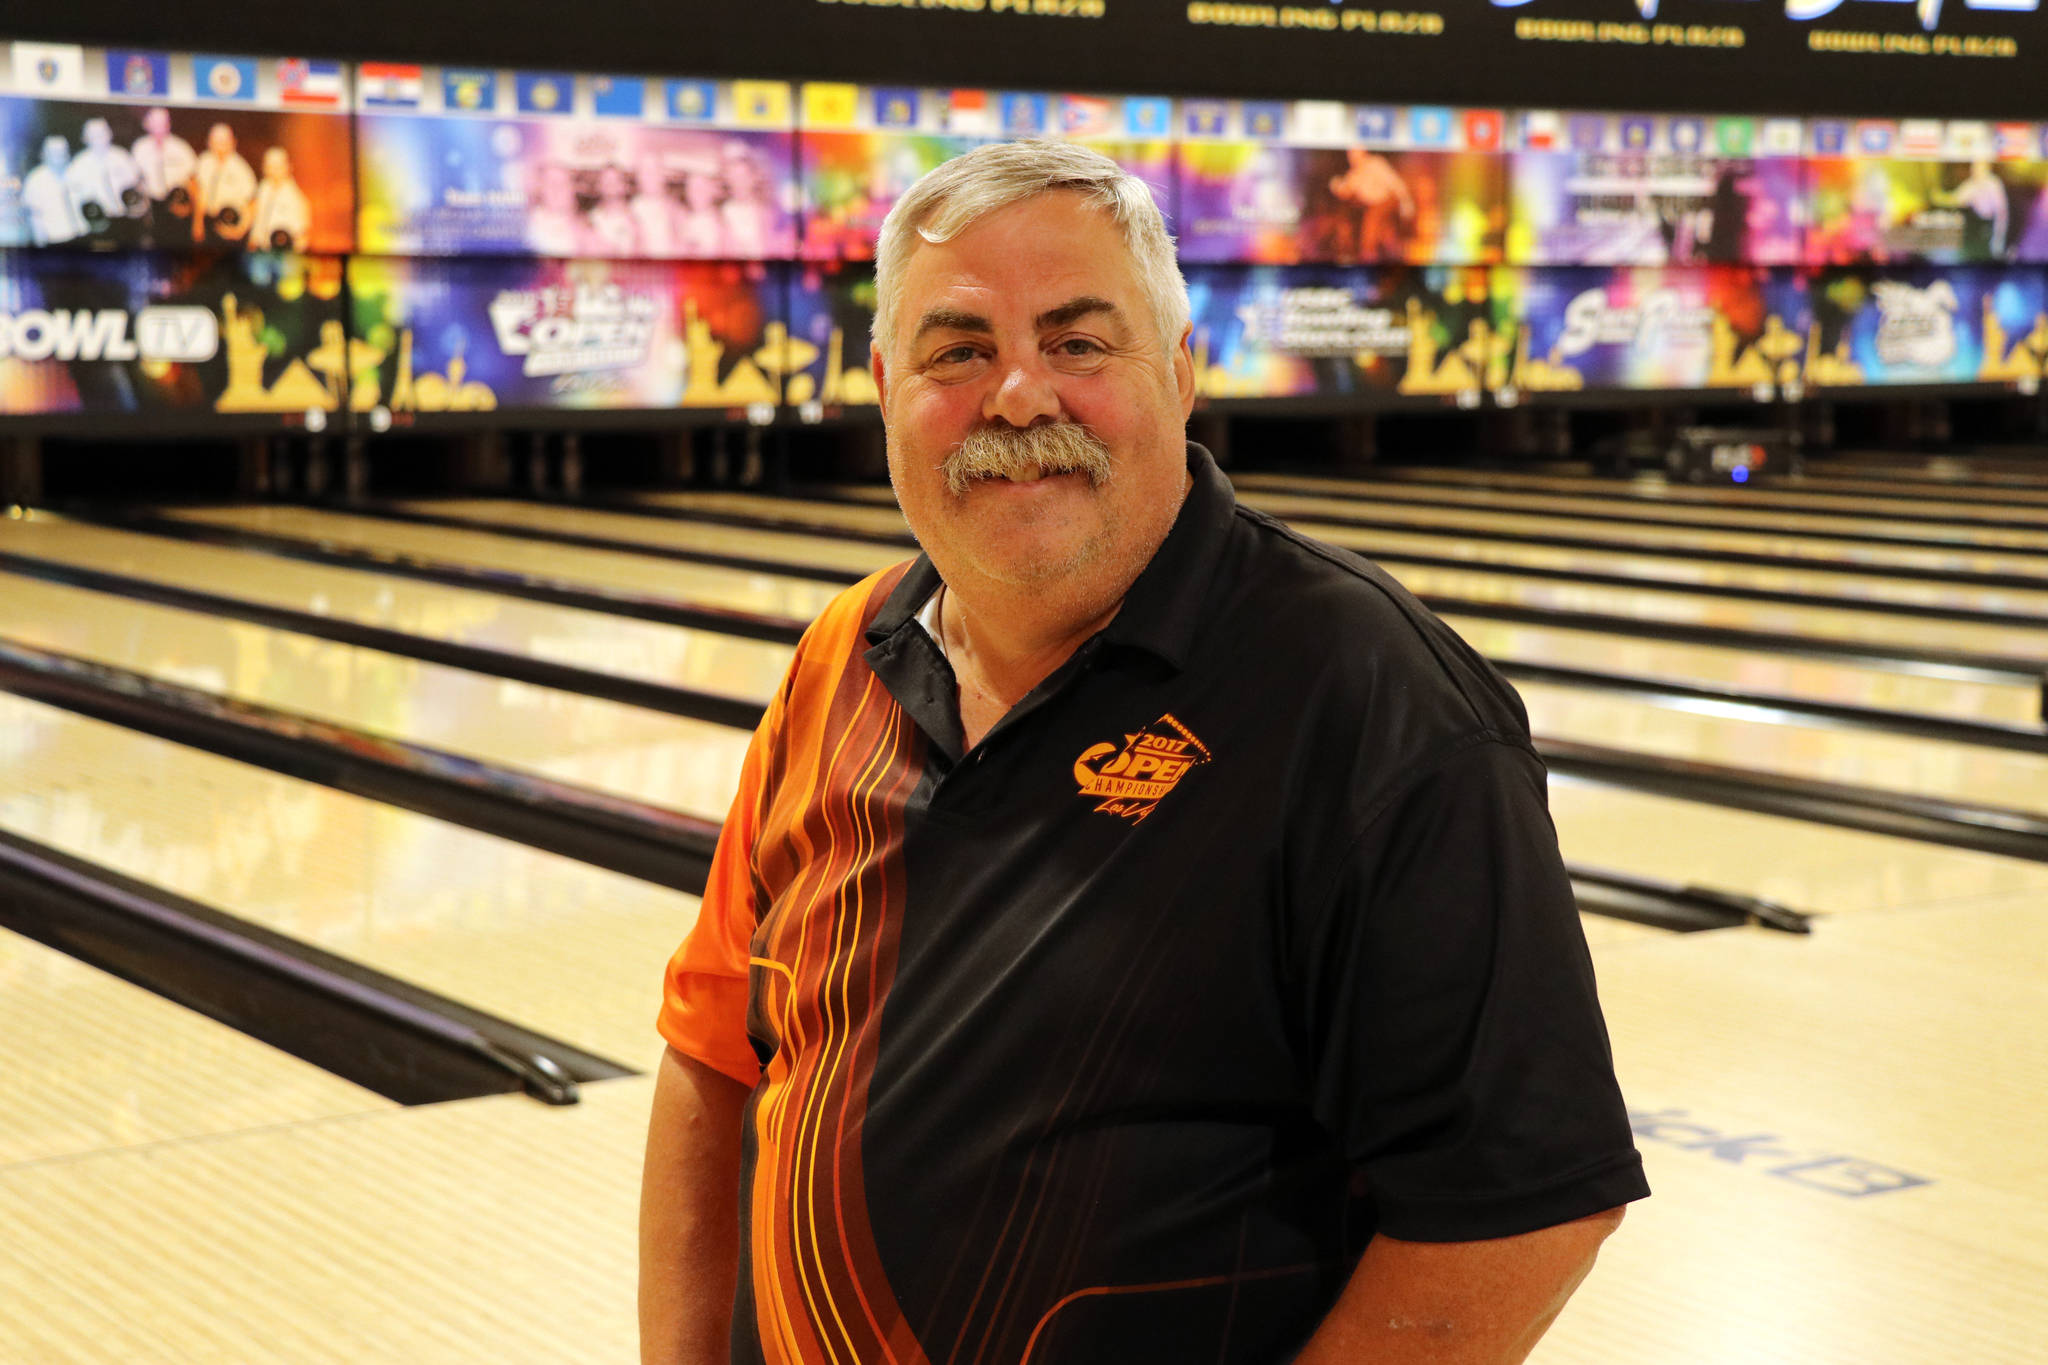 Don Erickson, pictured here, is the current leader at the 2019 United States Bowling Congress Open Championships. Photo courtesy of United States Bowling Congress.